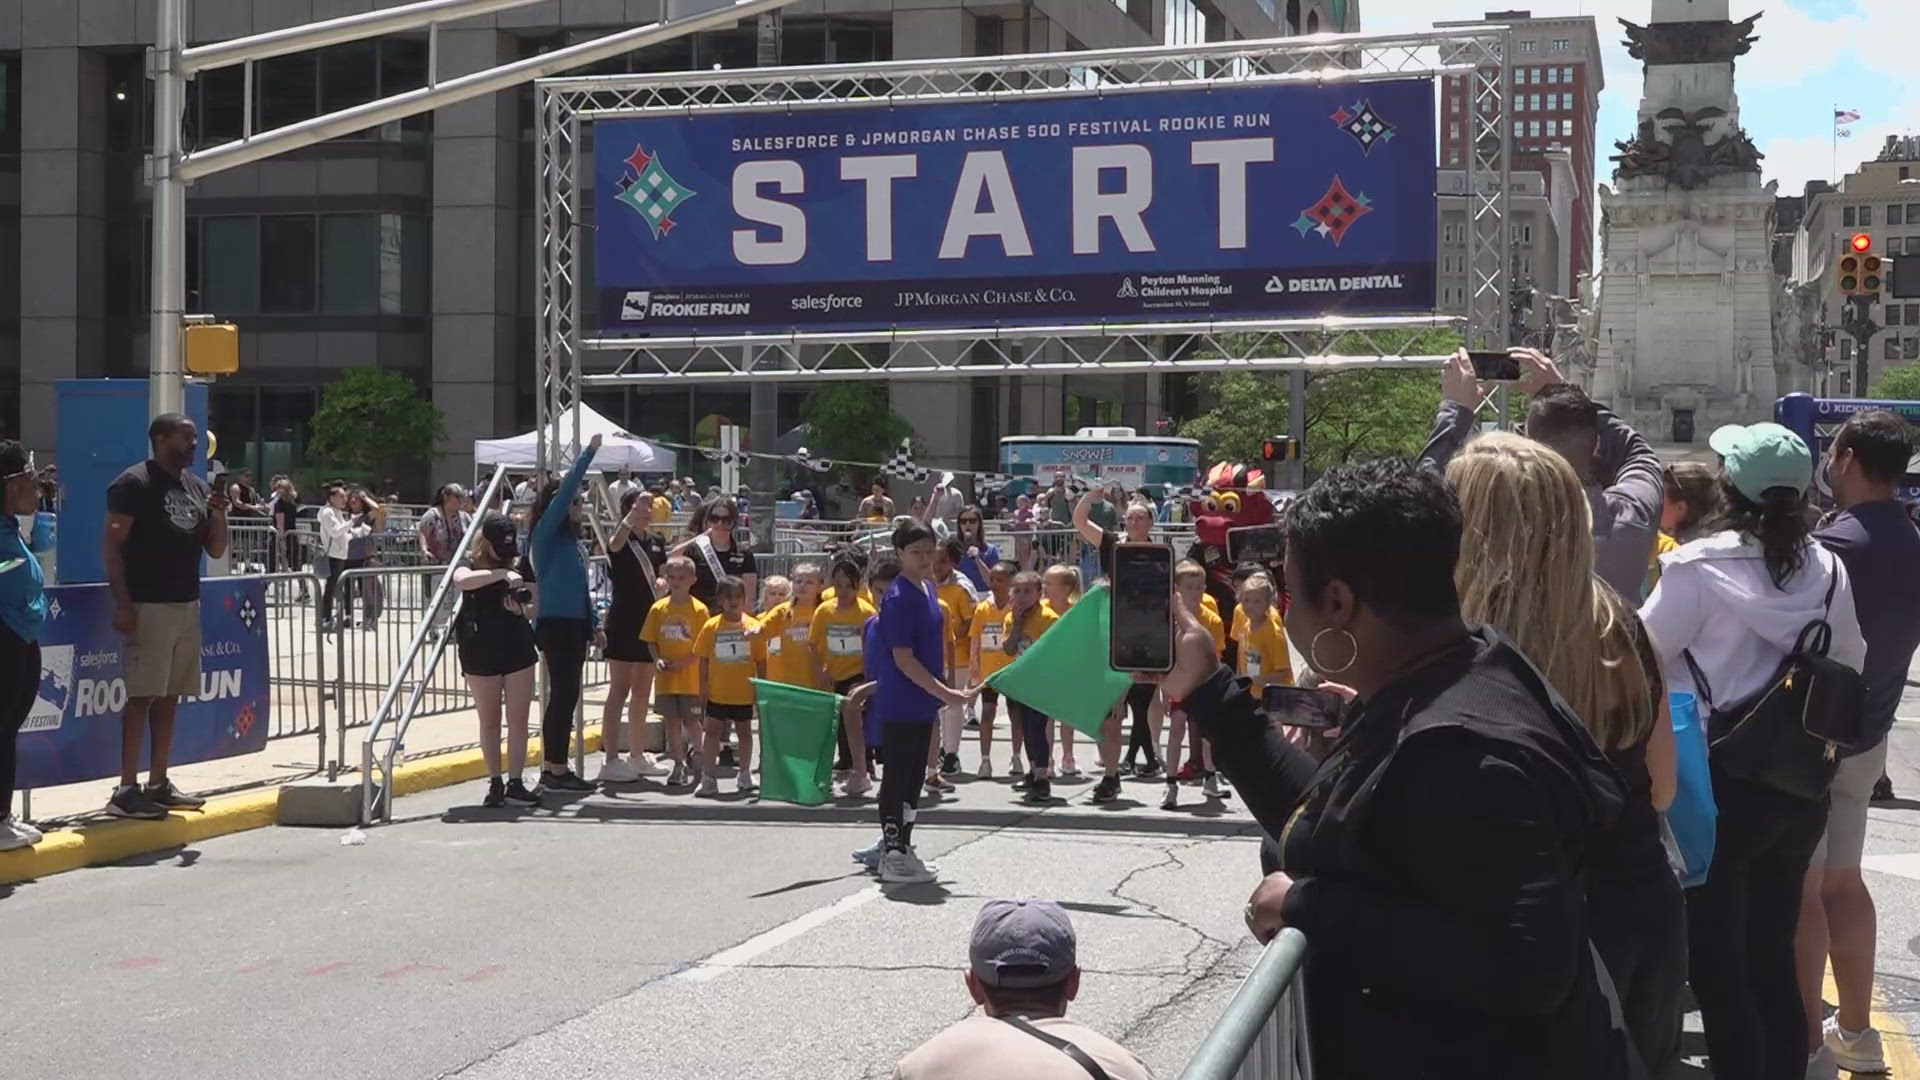 13News reporter Anna Chalker reports from Monument Circle during the 500 Festival Kids Day.